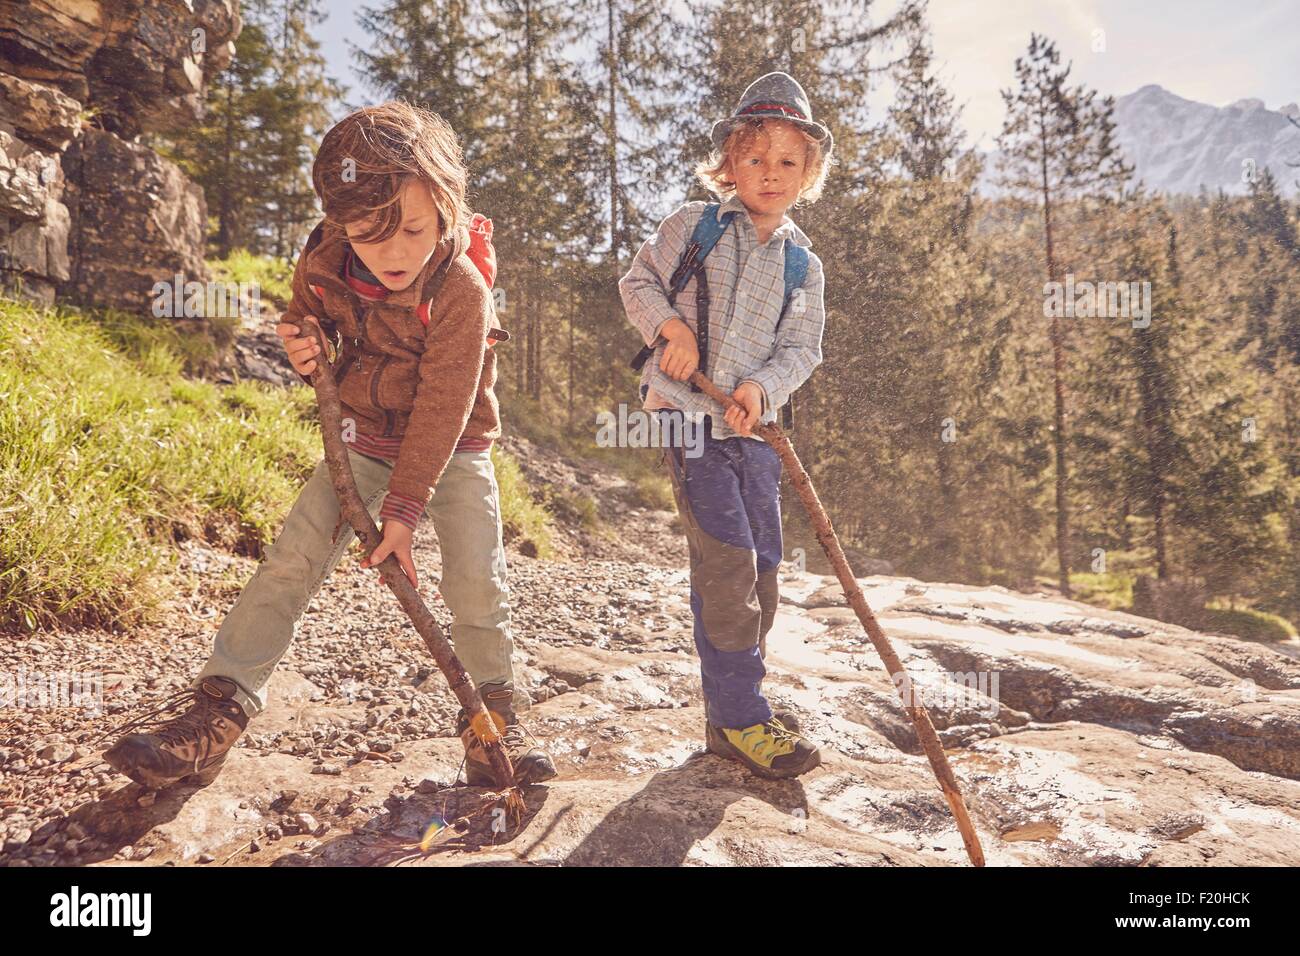 Two young boys, holding sticks, exploring forest Stock Photo